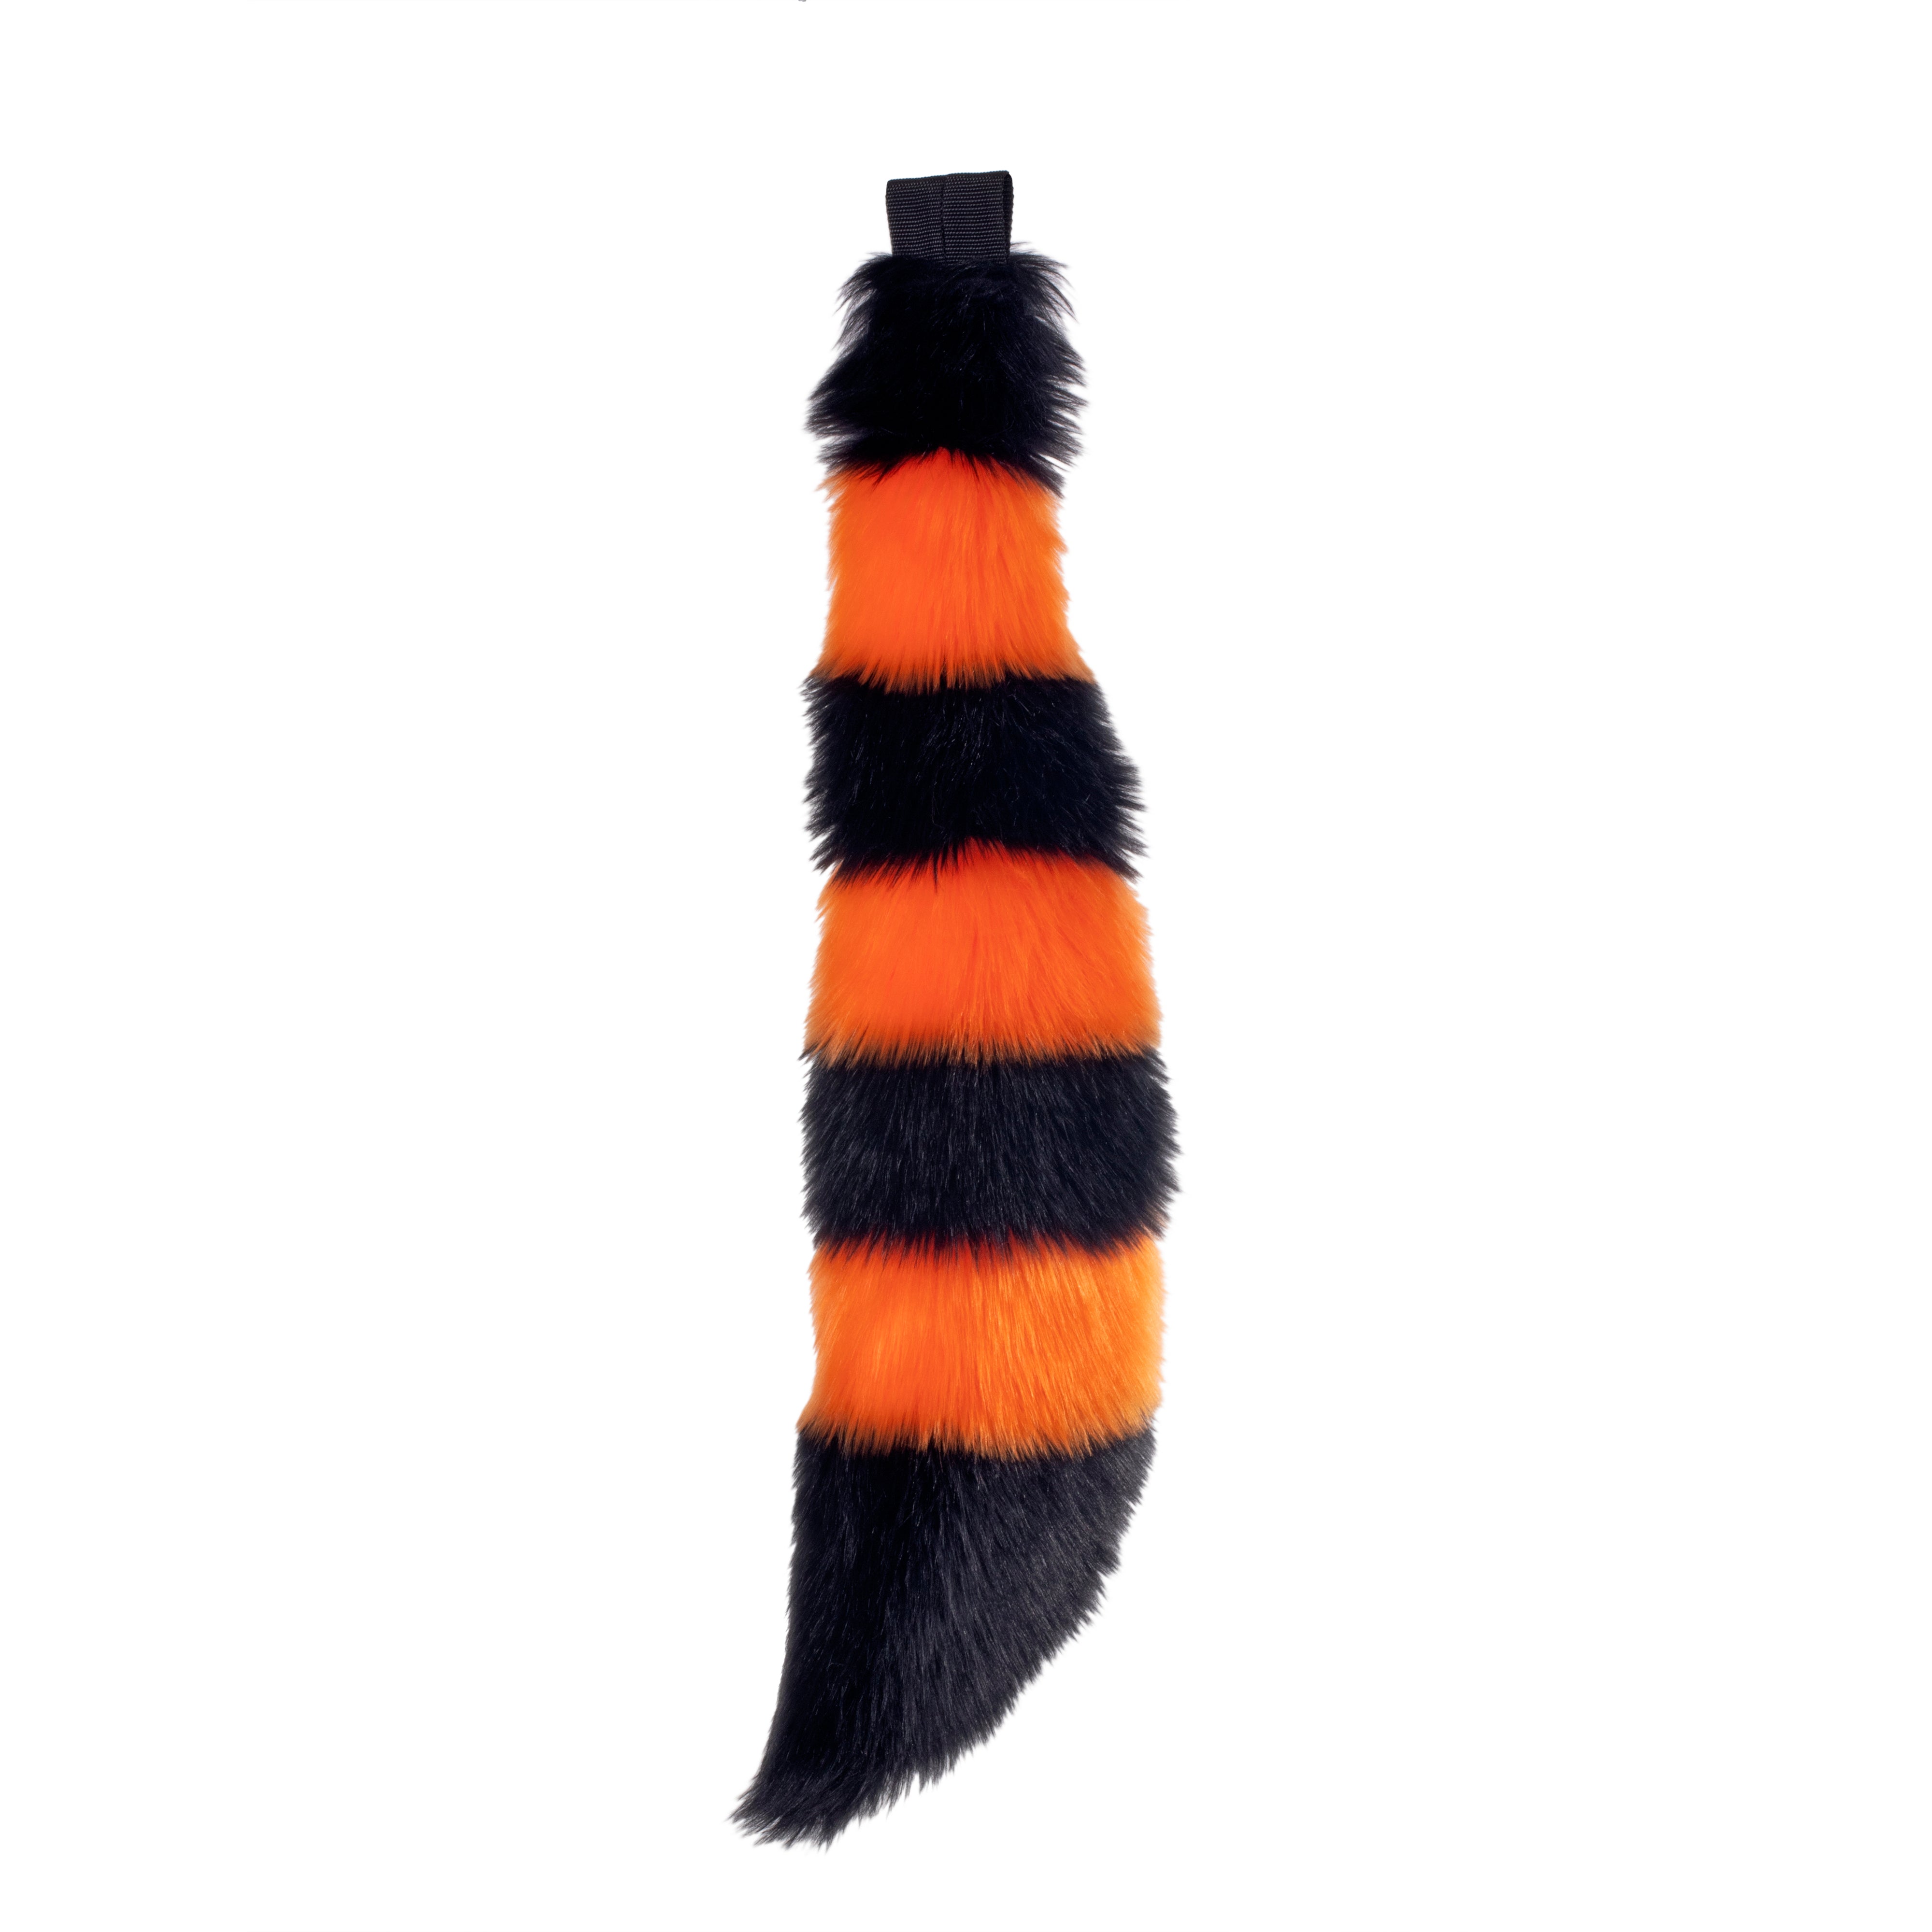 orange Pawstar stripey fluffy fox tail. Great for halloween costume and furry cosplay.